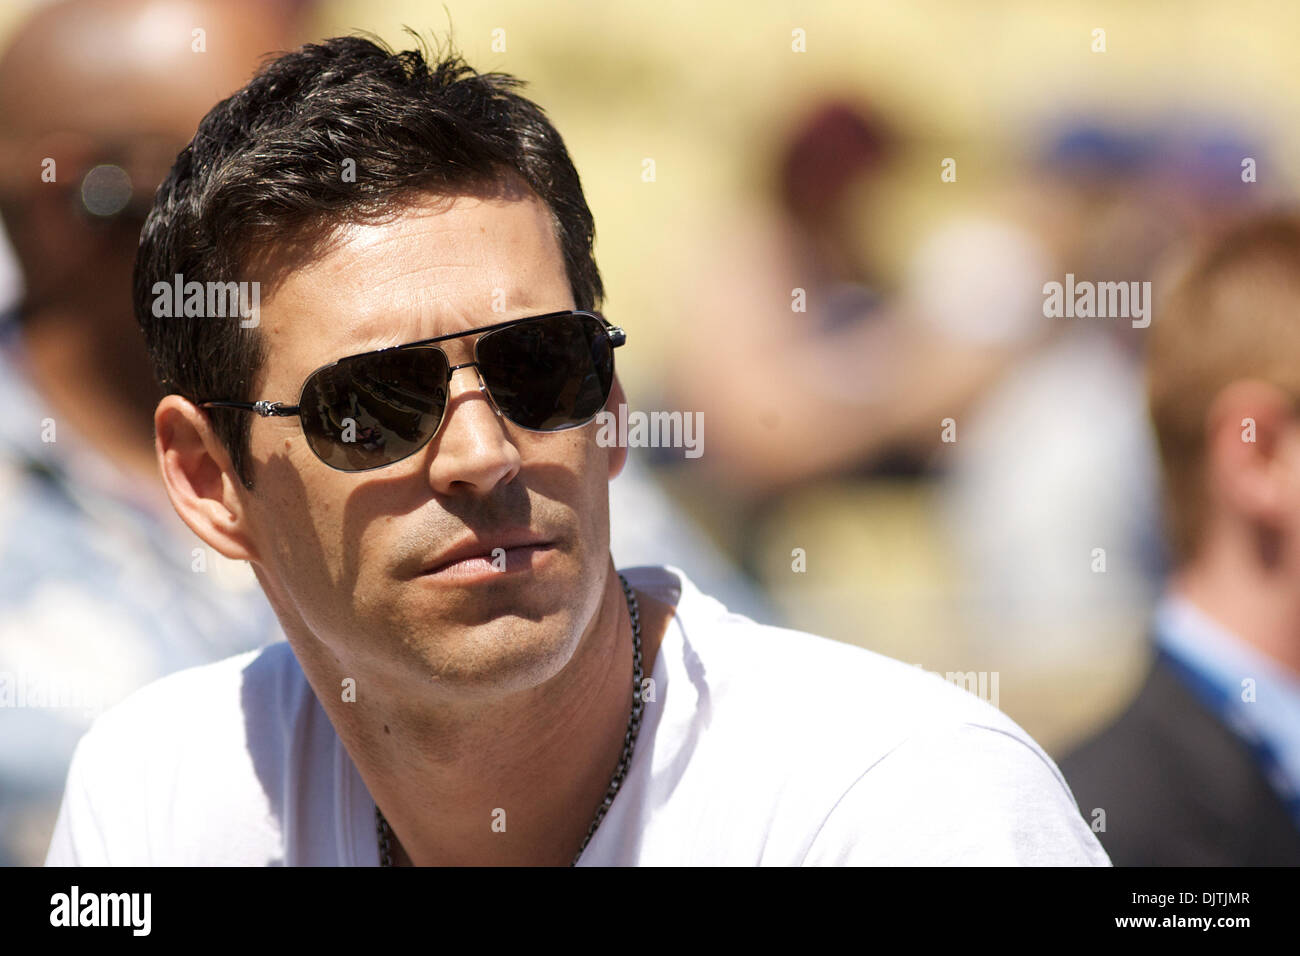 CSI Miami star Eddie Cibrian shares a moment with some fans prior to the start of the Los Angeles Dodgers home opener.  Cibrian was there with his girlfriend LeAnne Rimes. (Credit Image: © Tony Leon/Southcreek Global/ZUMApress.com) Stock Photo